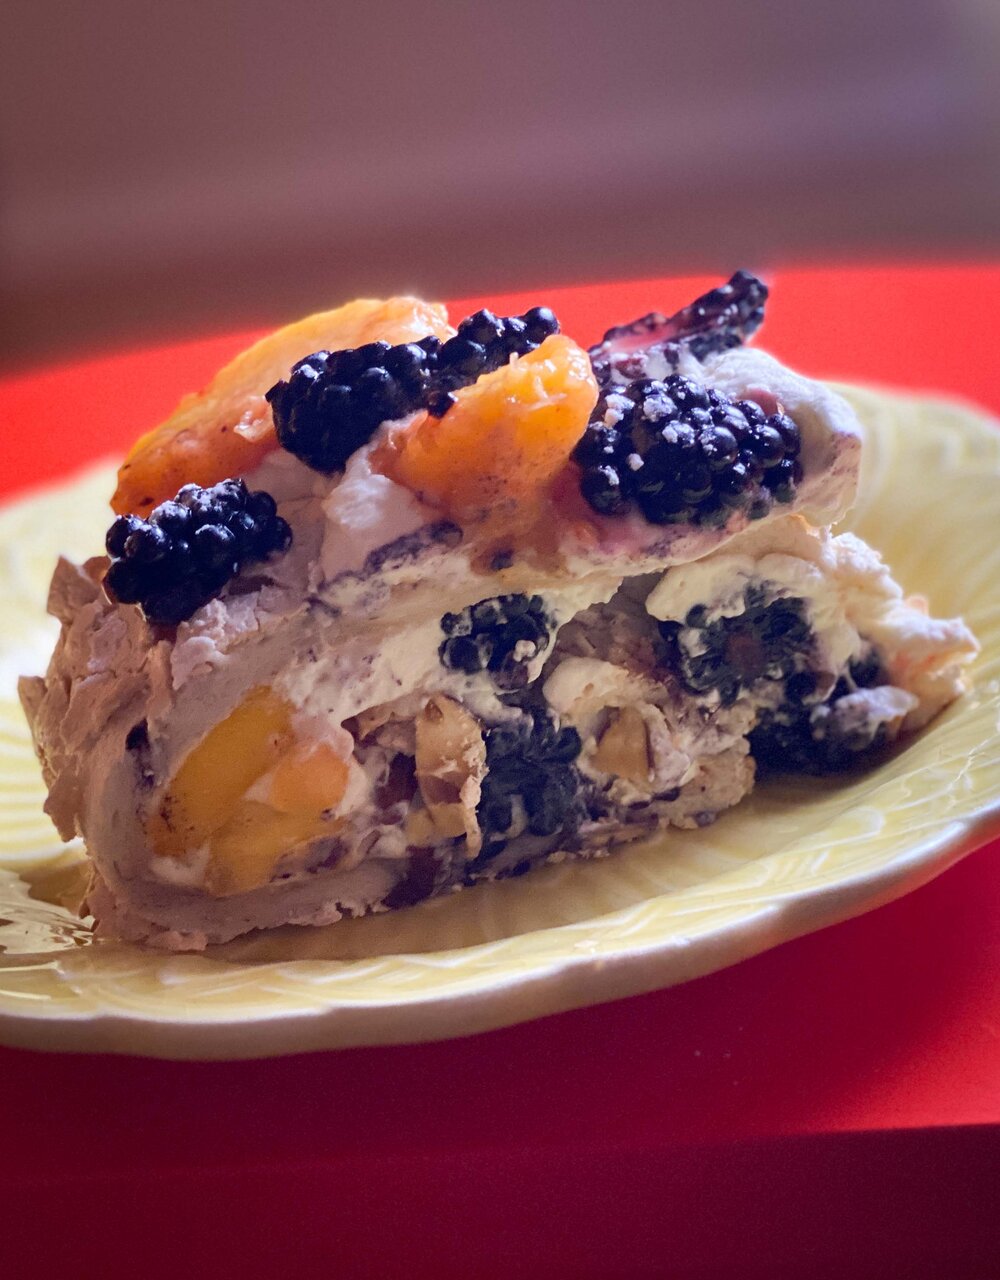 Showstopper Rolled Pavlova with Peaches and Blackberries